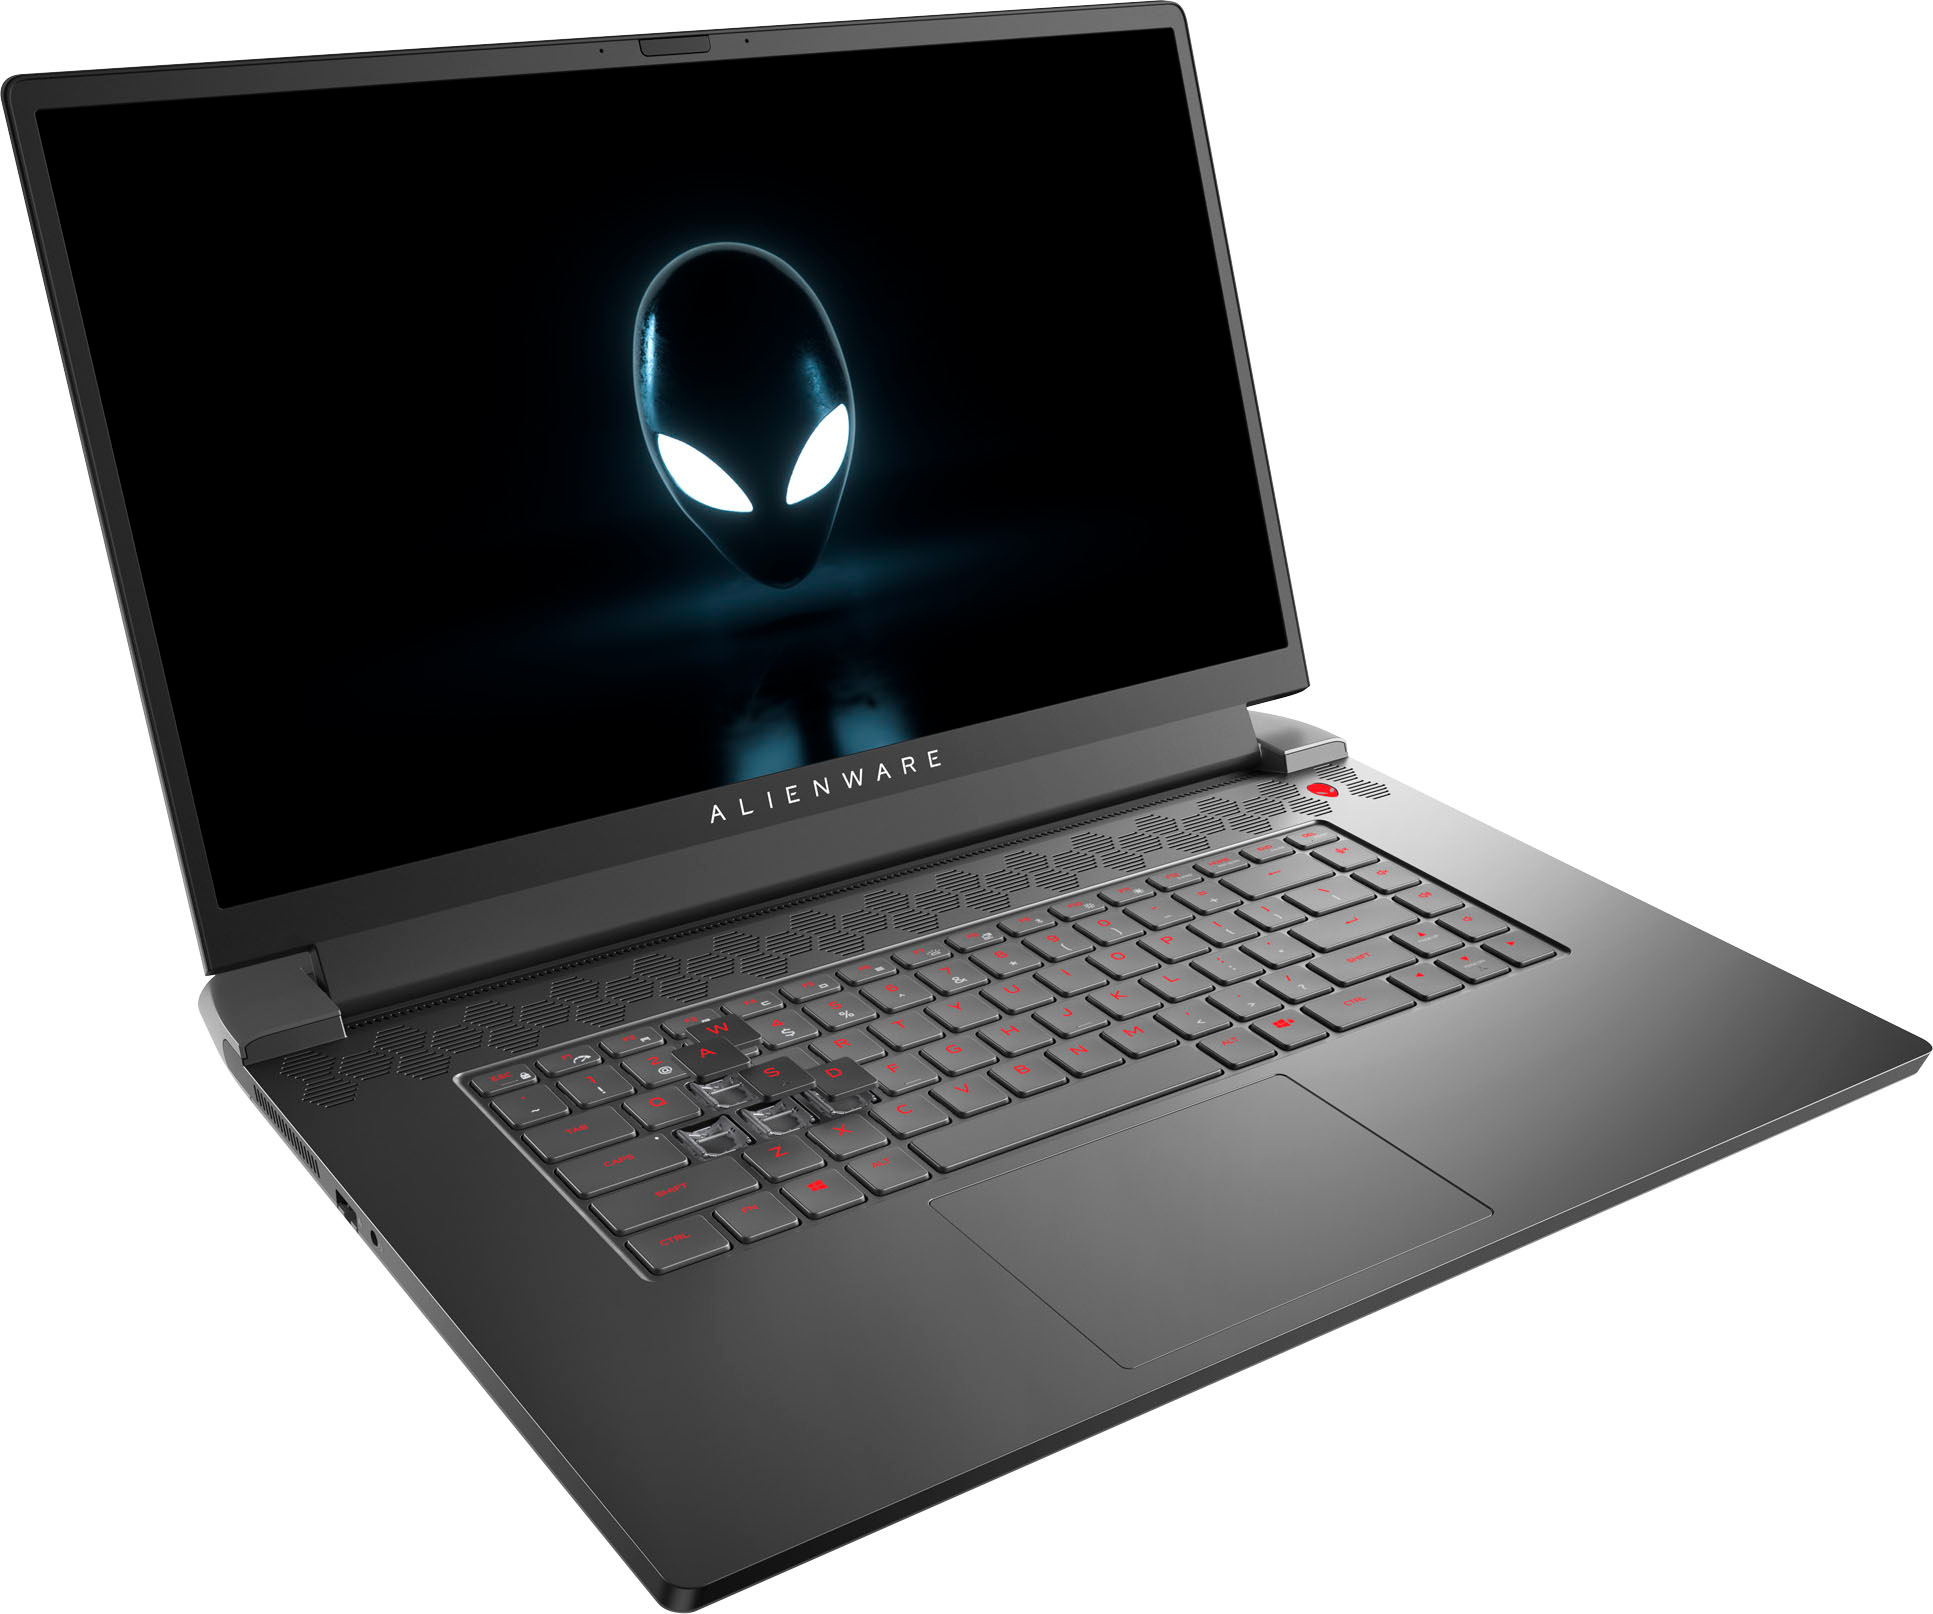 The Alienware m17 17 AMD Ryzen 9 RTX 3070 Ti Gaming Laptop Drops to Only  $1199.99